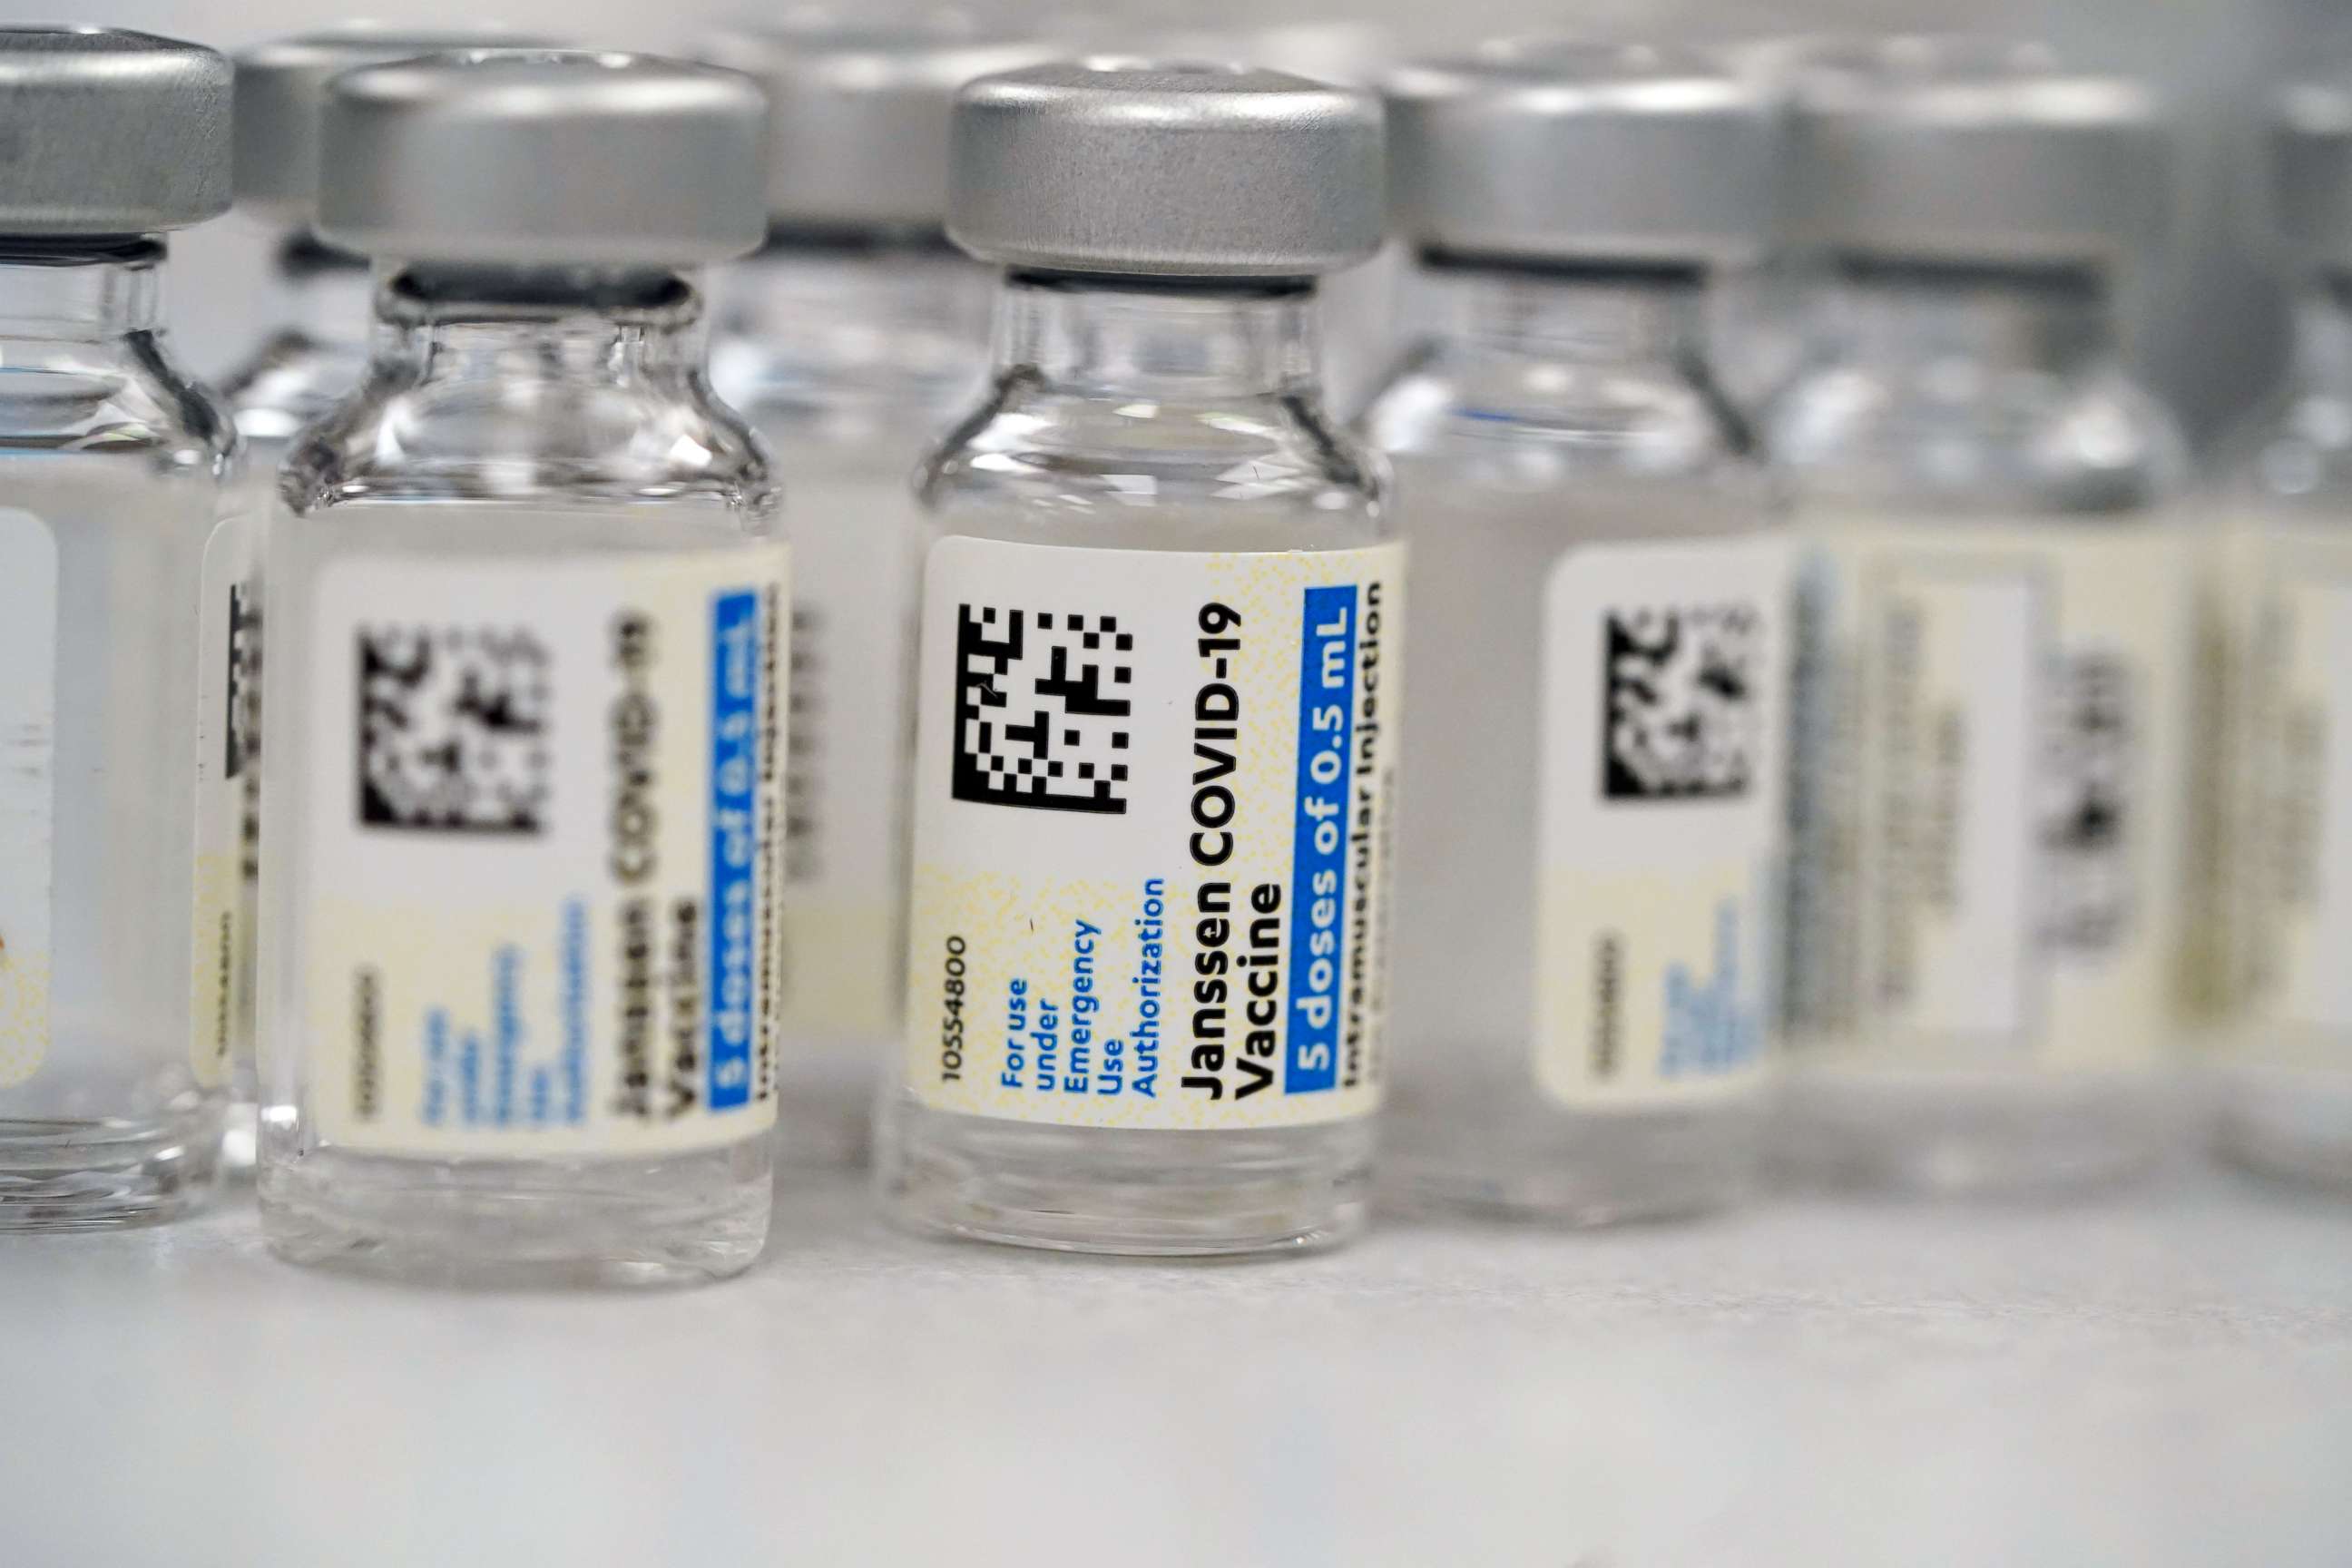 PHOTO: Vials of Johnson & Johnson's single-dose COVID-19 vaccine are seen at a hospital pharmacy in Denver, Colorado, on March 6, 2021.